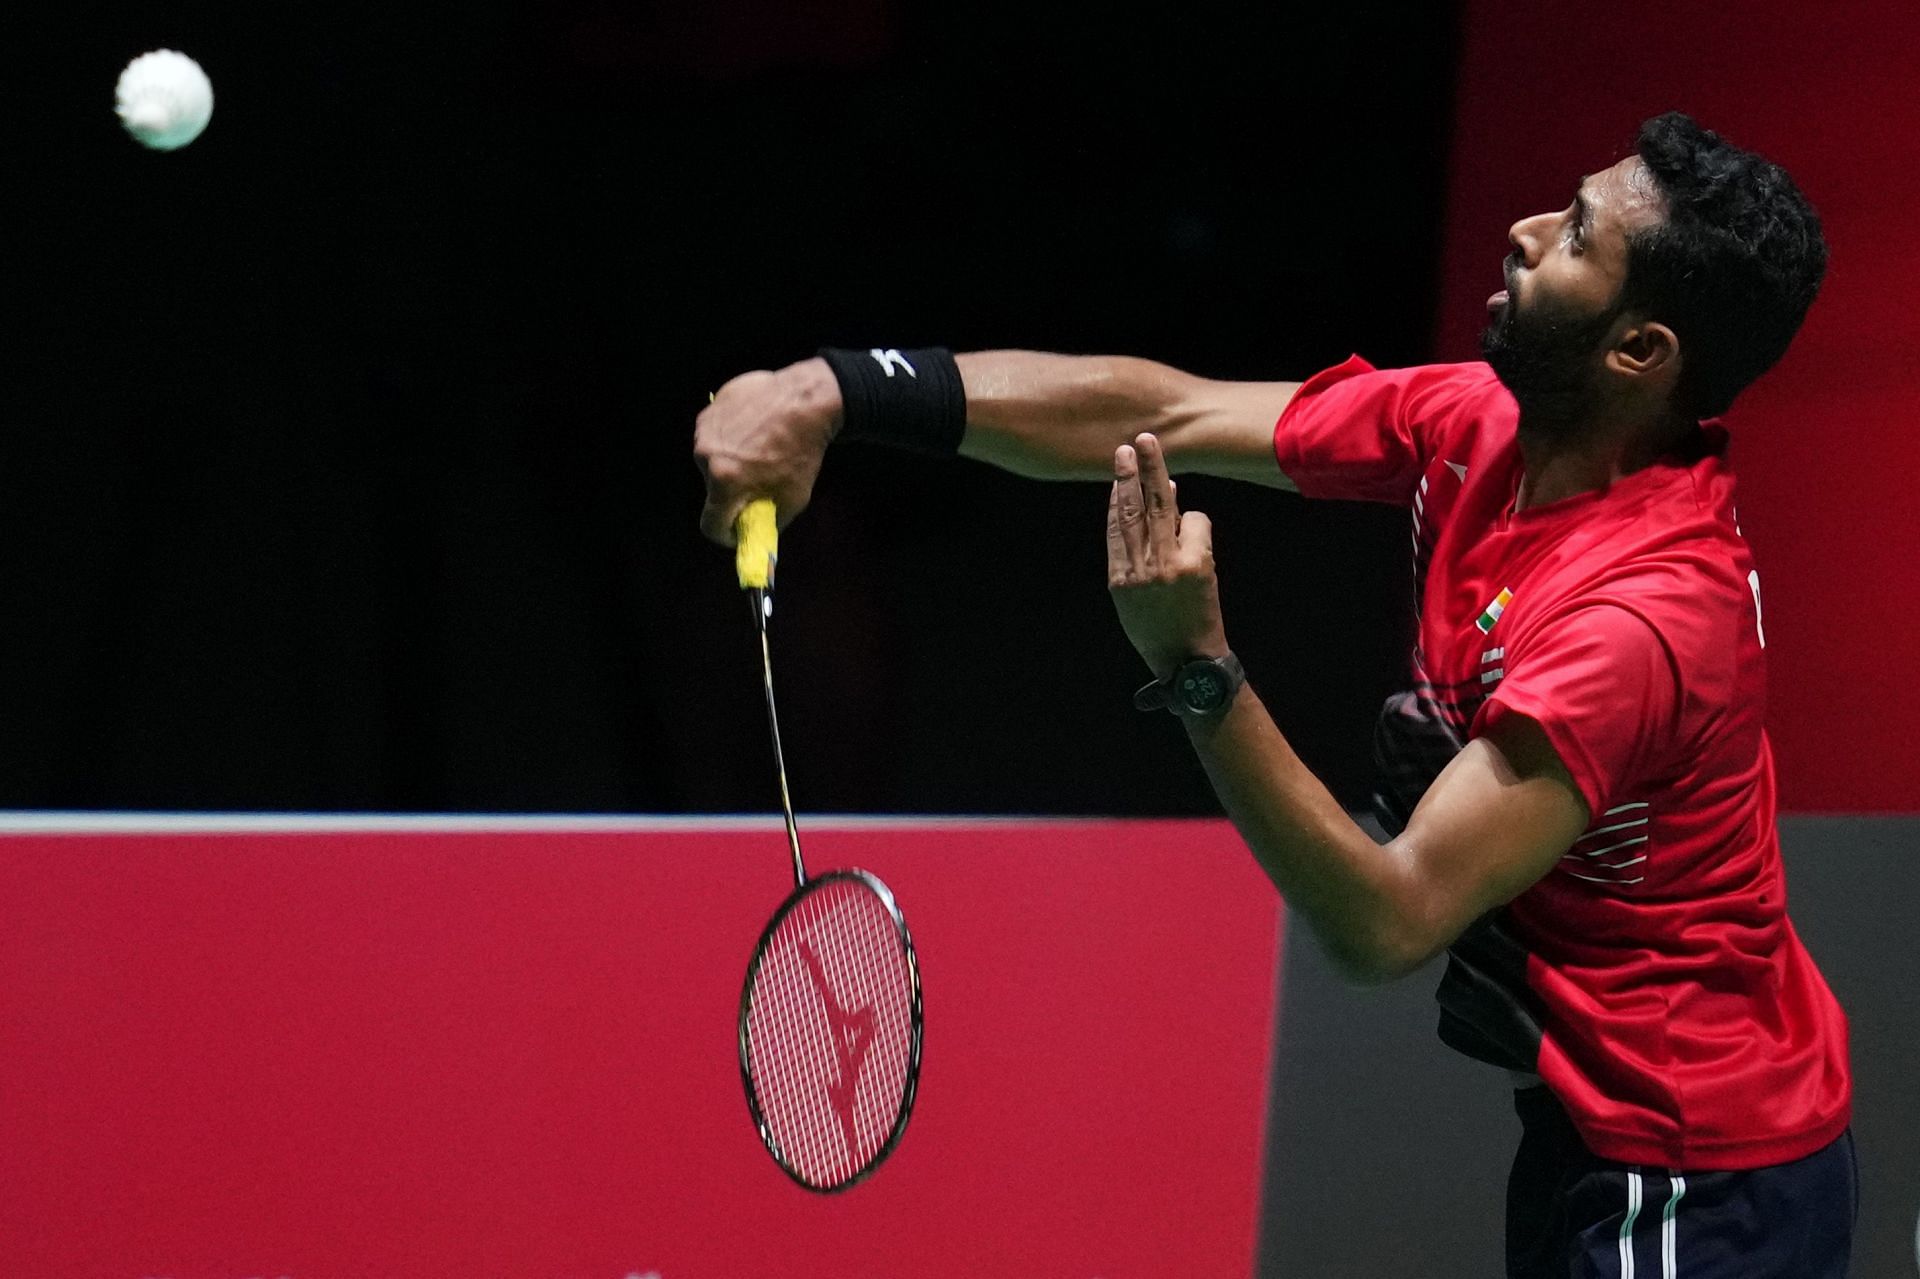 HS Prannoy goes for a smash at the 2022 BWF World Championships (Image: Getty)